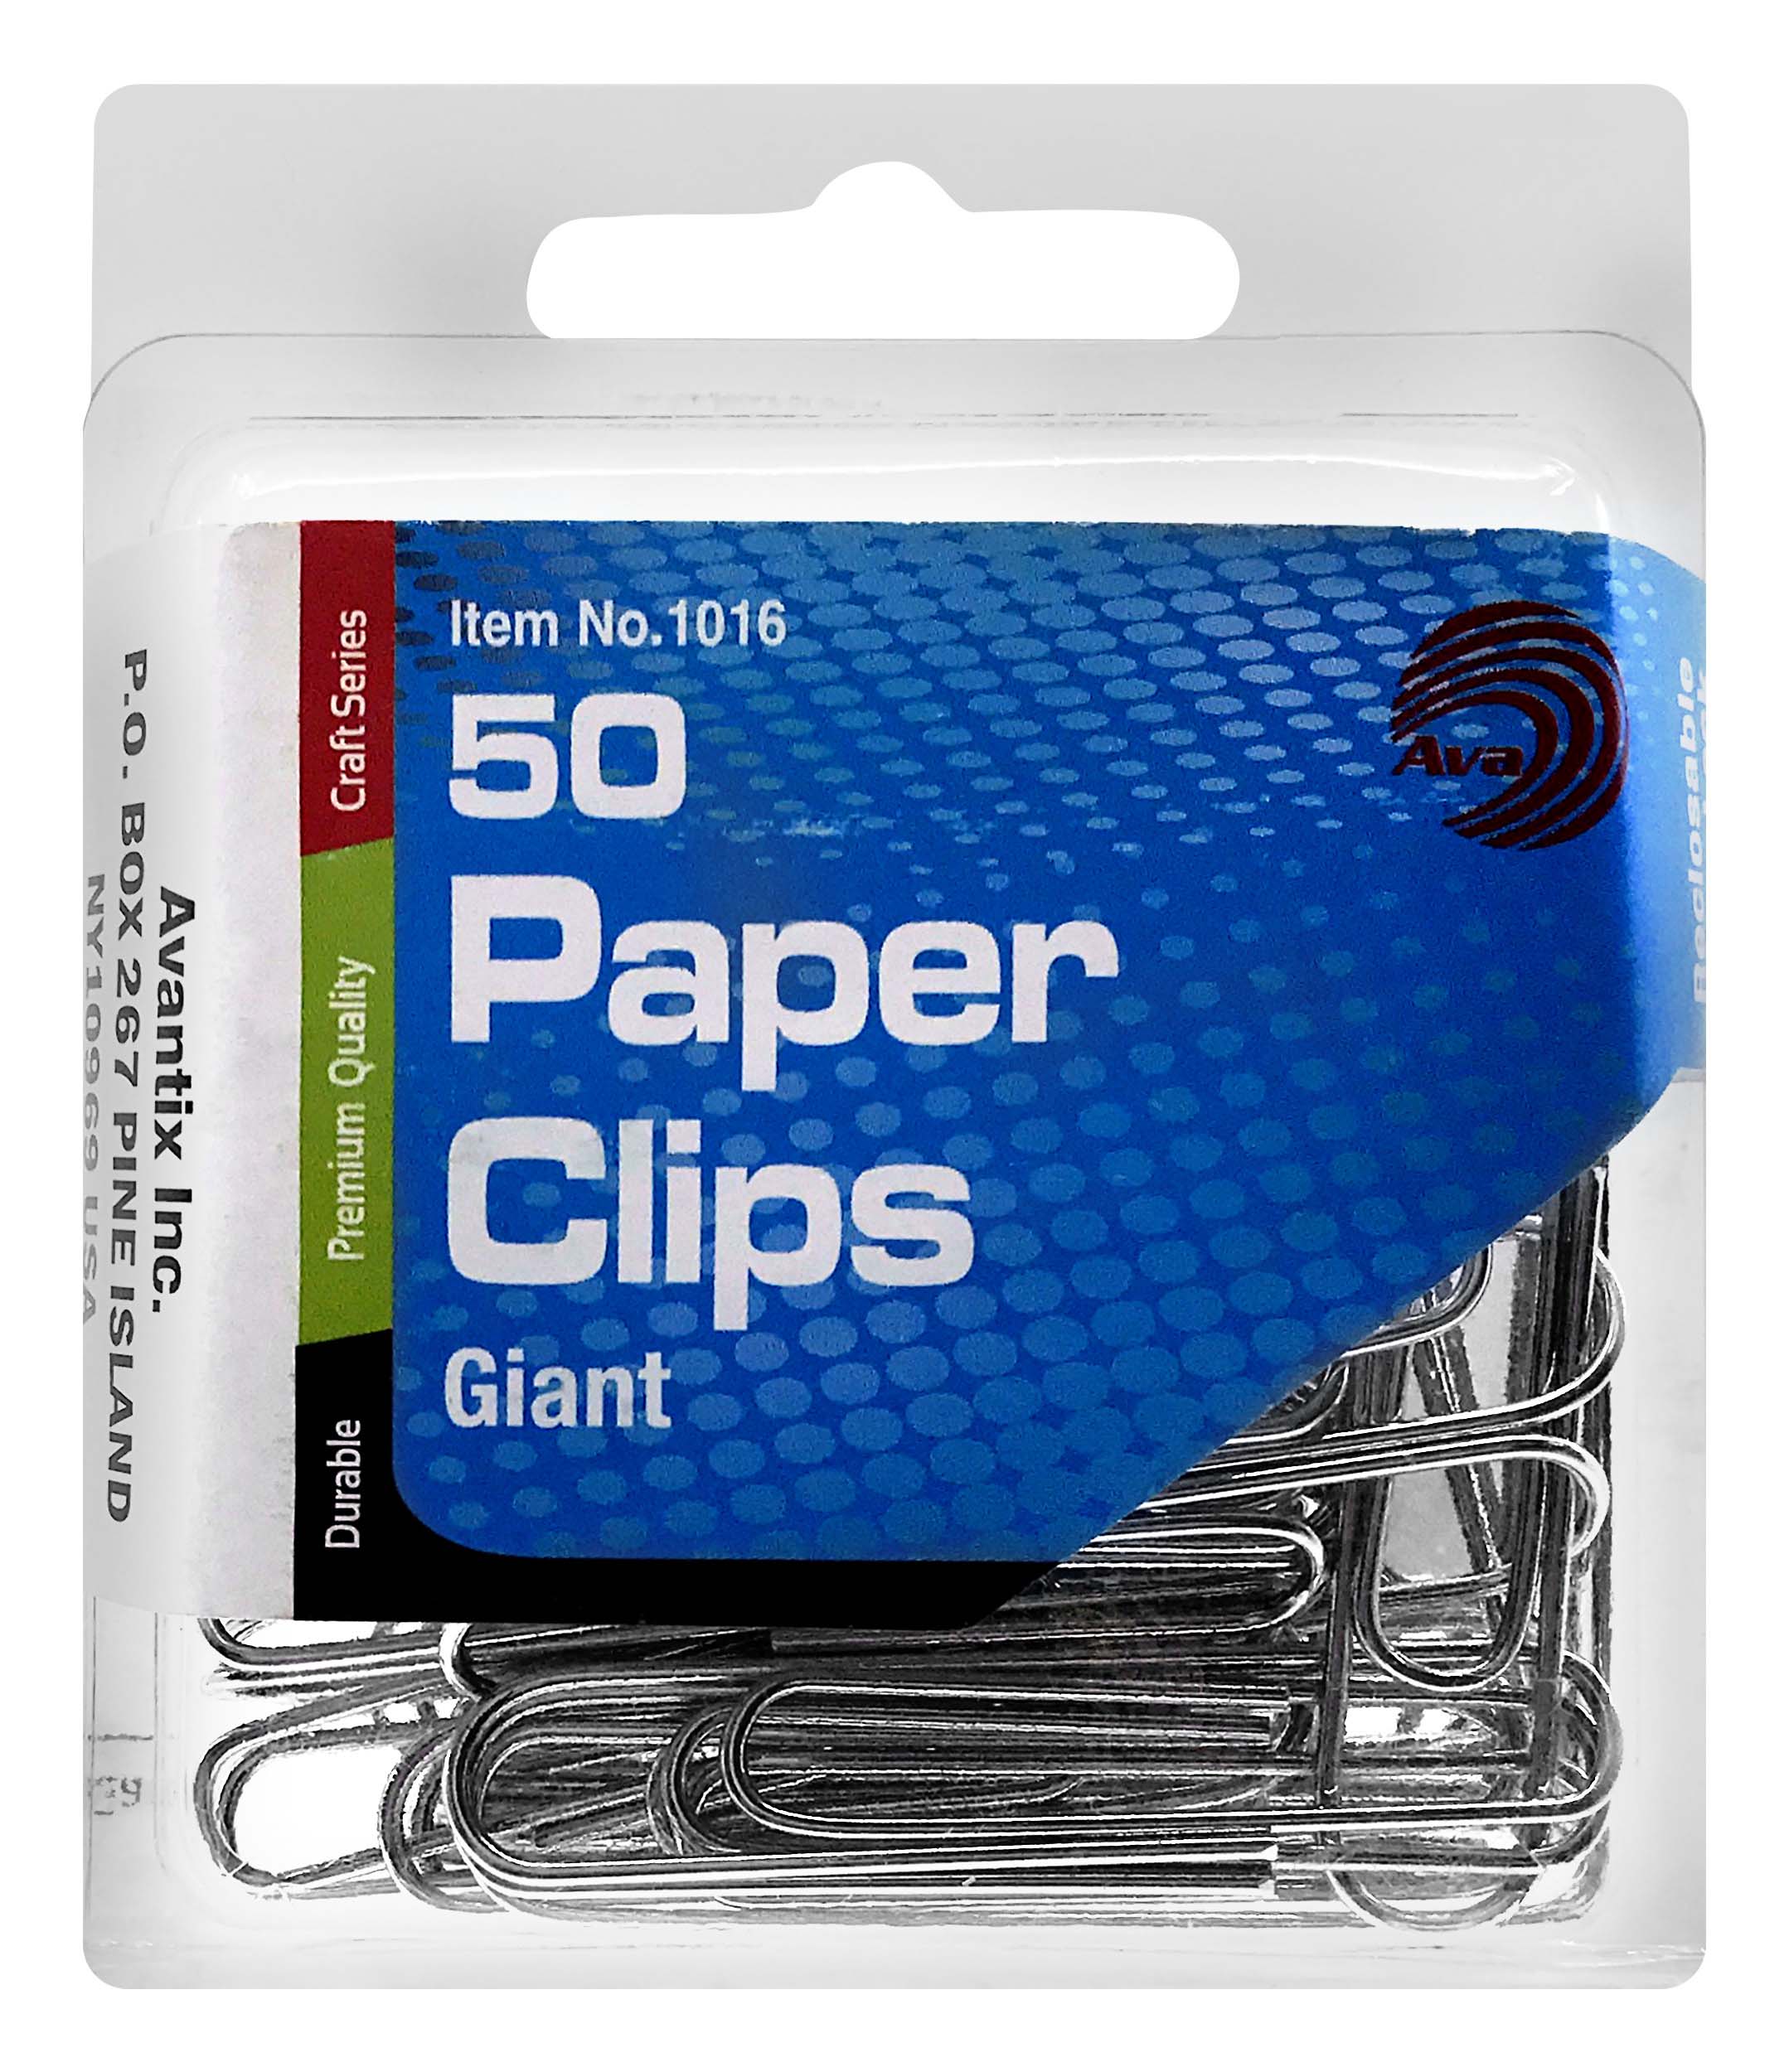 Ava Giant Paper Clips, 50 Count